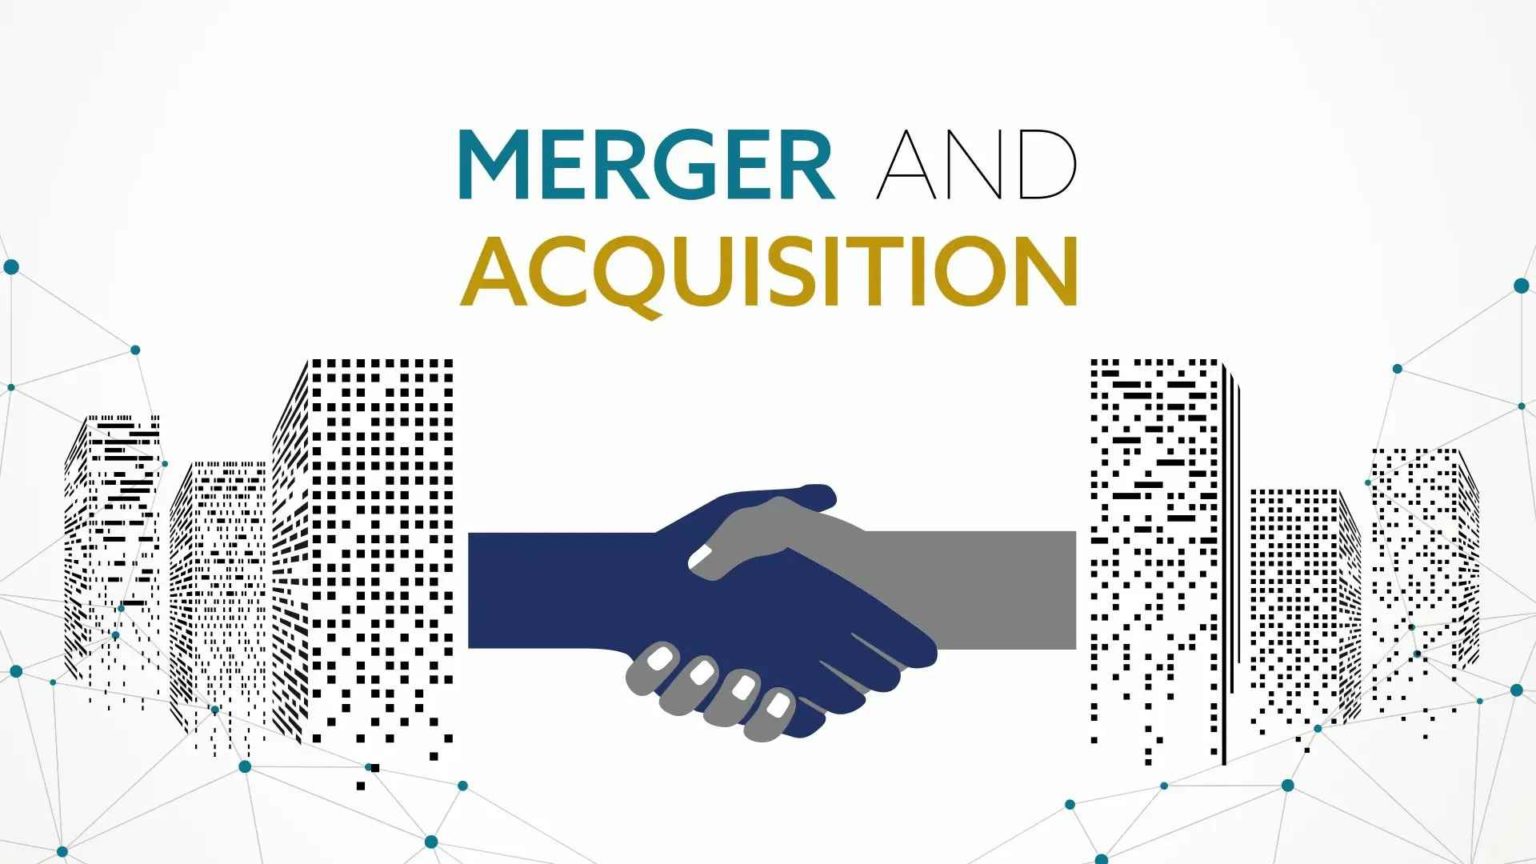 dissertation topics in mergers and acquisitions